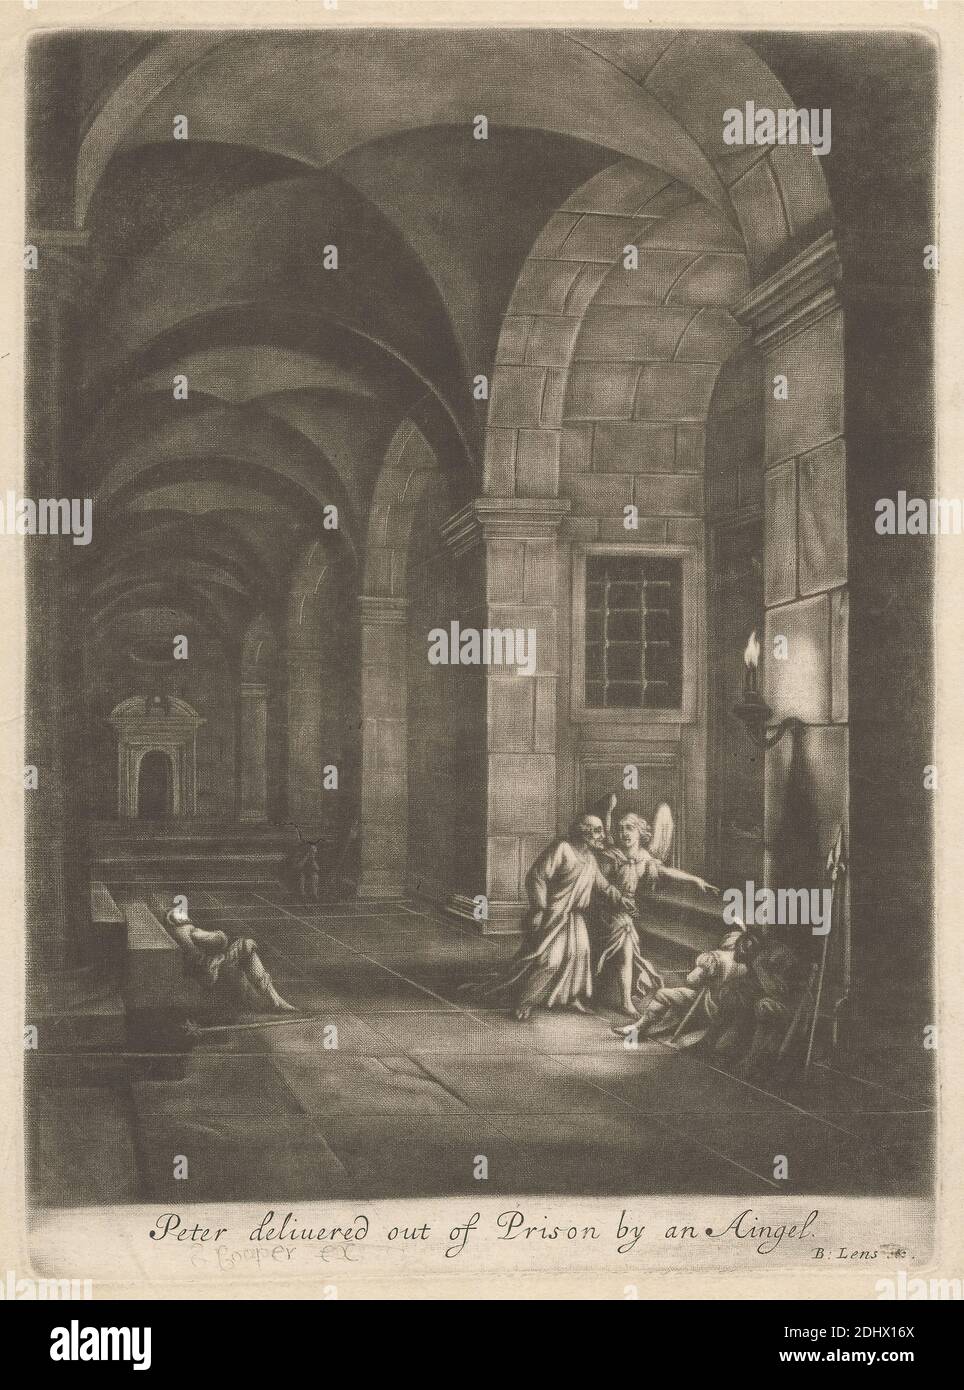 Peter Delivered out of Prison by an Angel, Print made by Bernard Lens, 1659–1725, British, undated, Mezzotint on medium, slightly textured, cream laid paper, Sheet: 8 3/4 × 6 11/16 inches (22.2 × 17 cm), Plate: 7 13/16 × 5 3/4 inches (19.8 × 14.6 cm), and Image: 7 5/16 × 5 3/4 inches (18.6 × 14.6 cm), angel, apostles, archways, candle, Christianity, escape, guards, New Testament, prison, religious and mythological subject, saint, sleeping, spears, vault bays Stock Photo